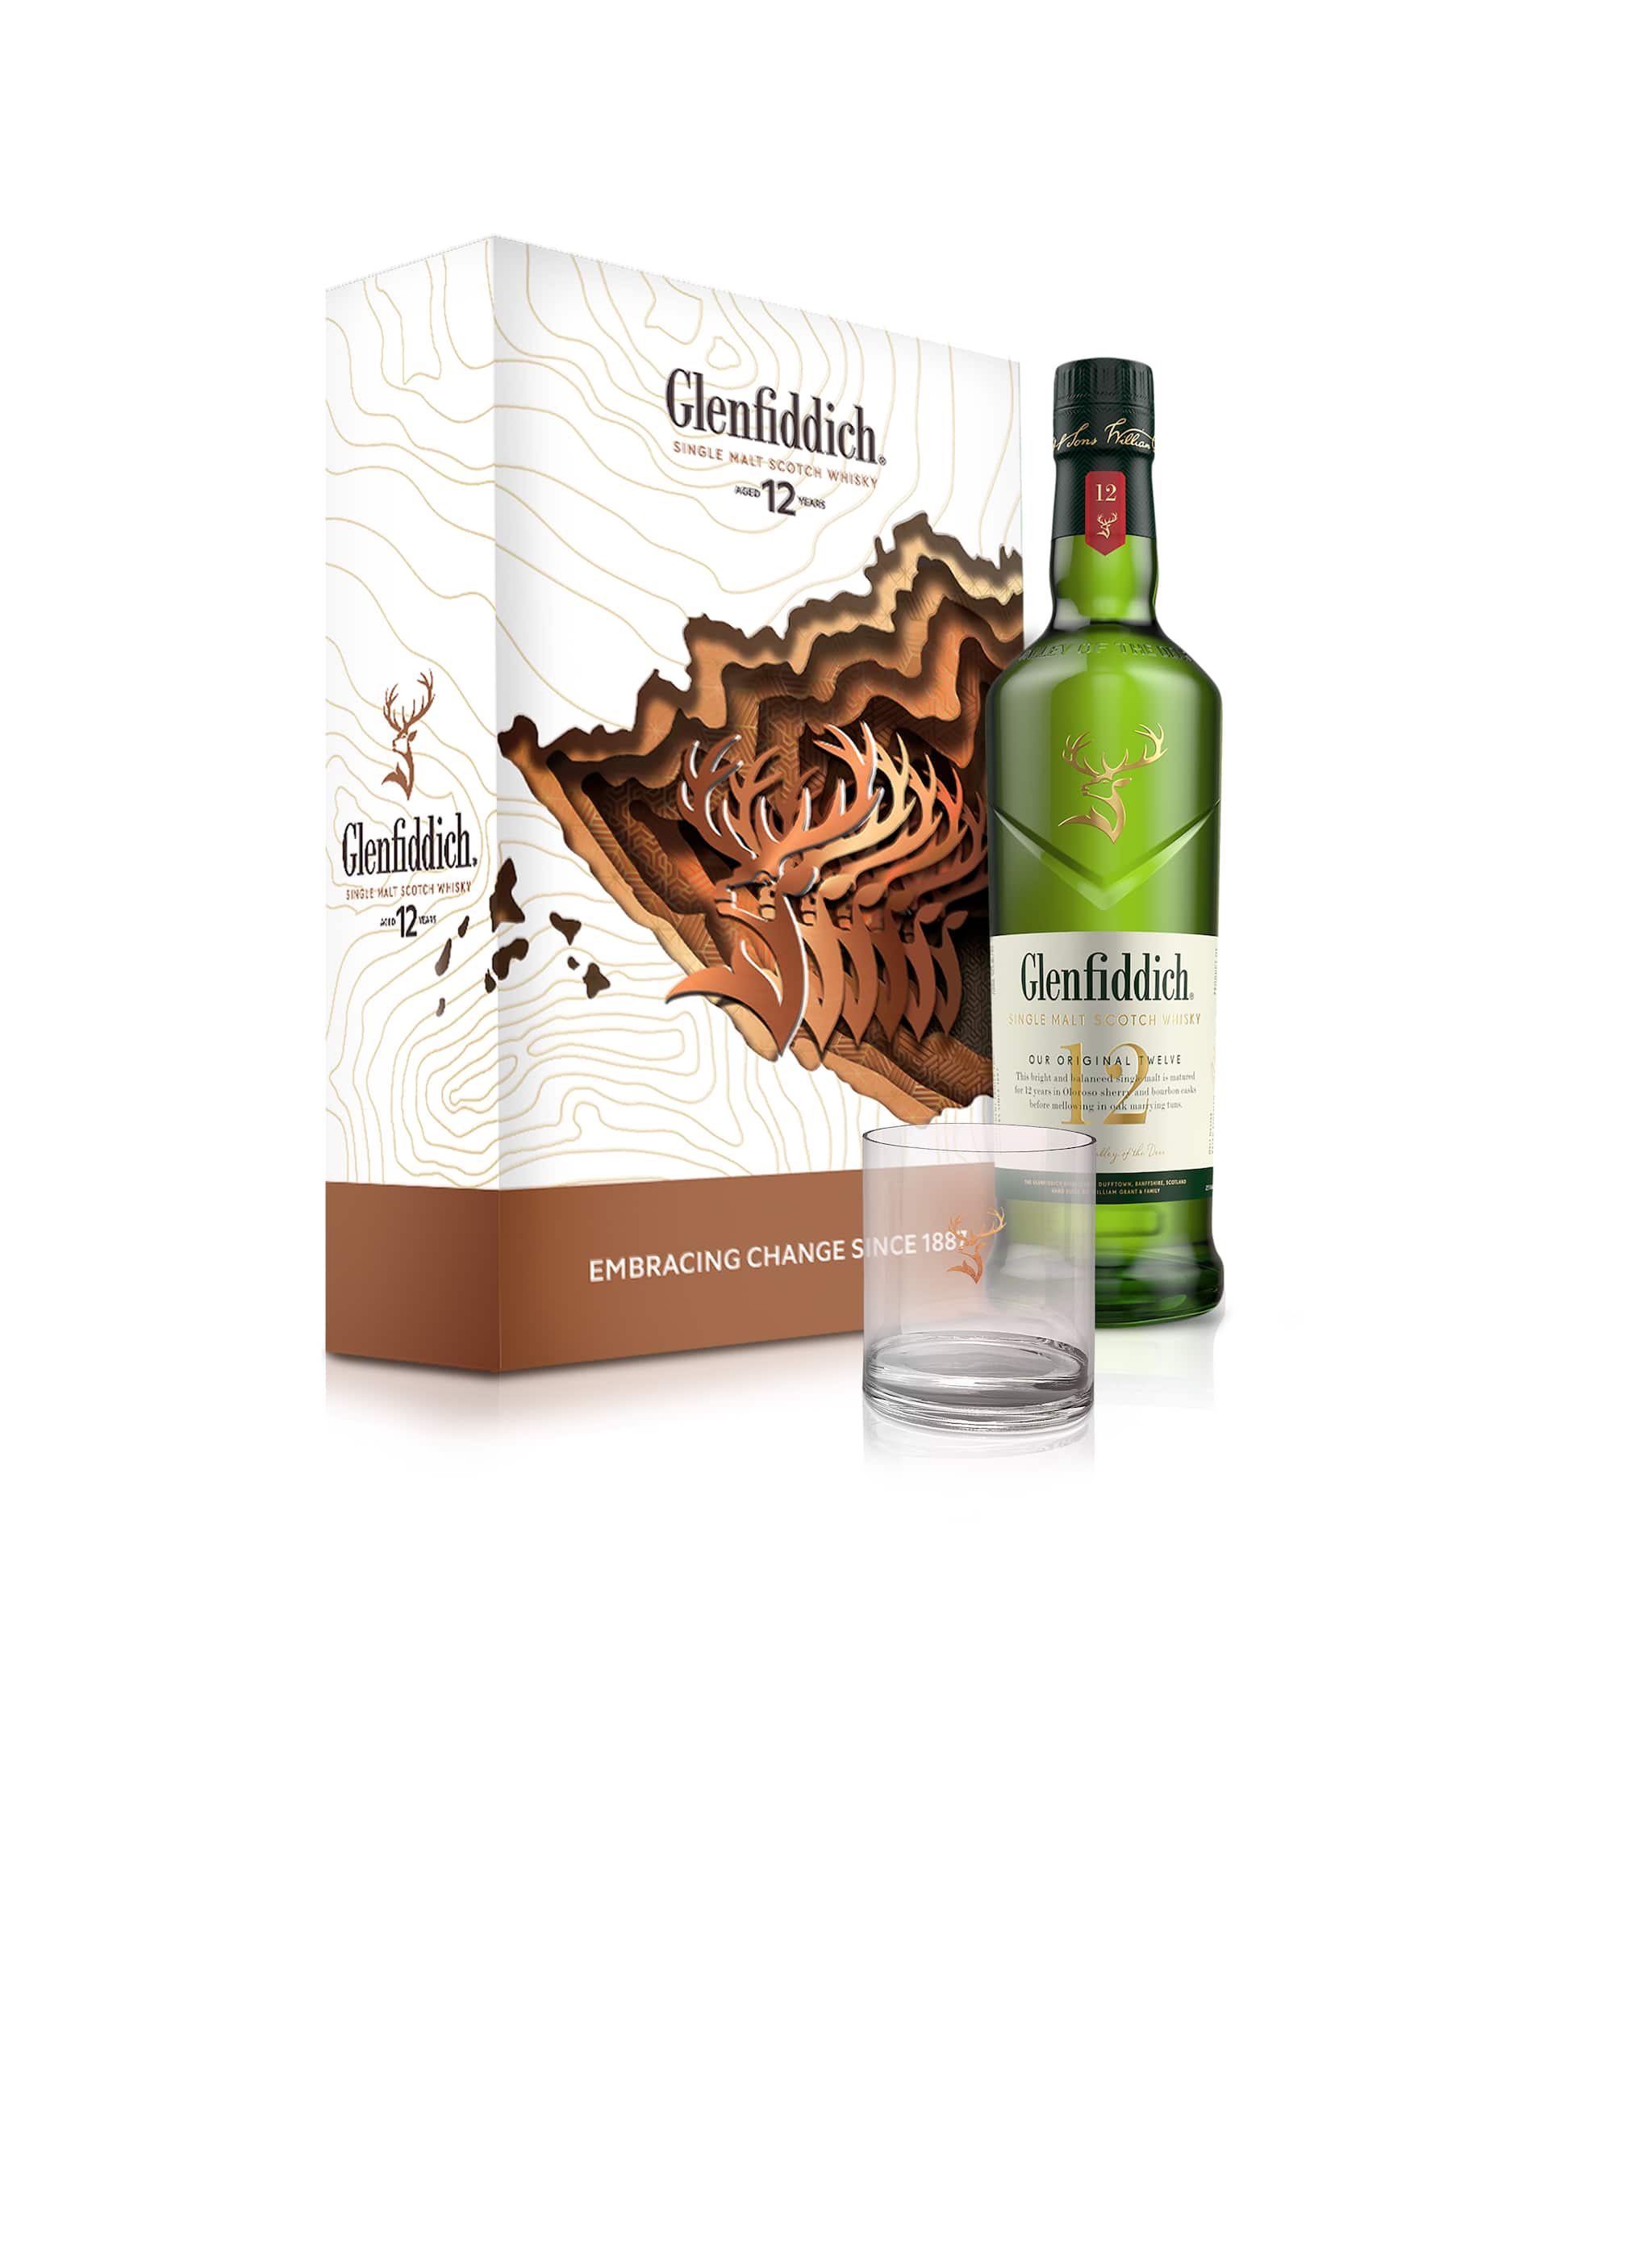 Glenfiddich Limited Edition Pack